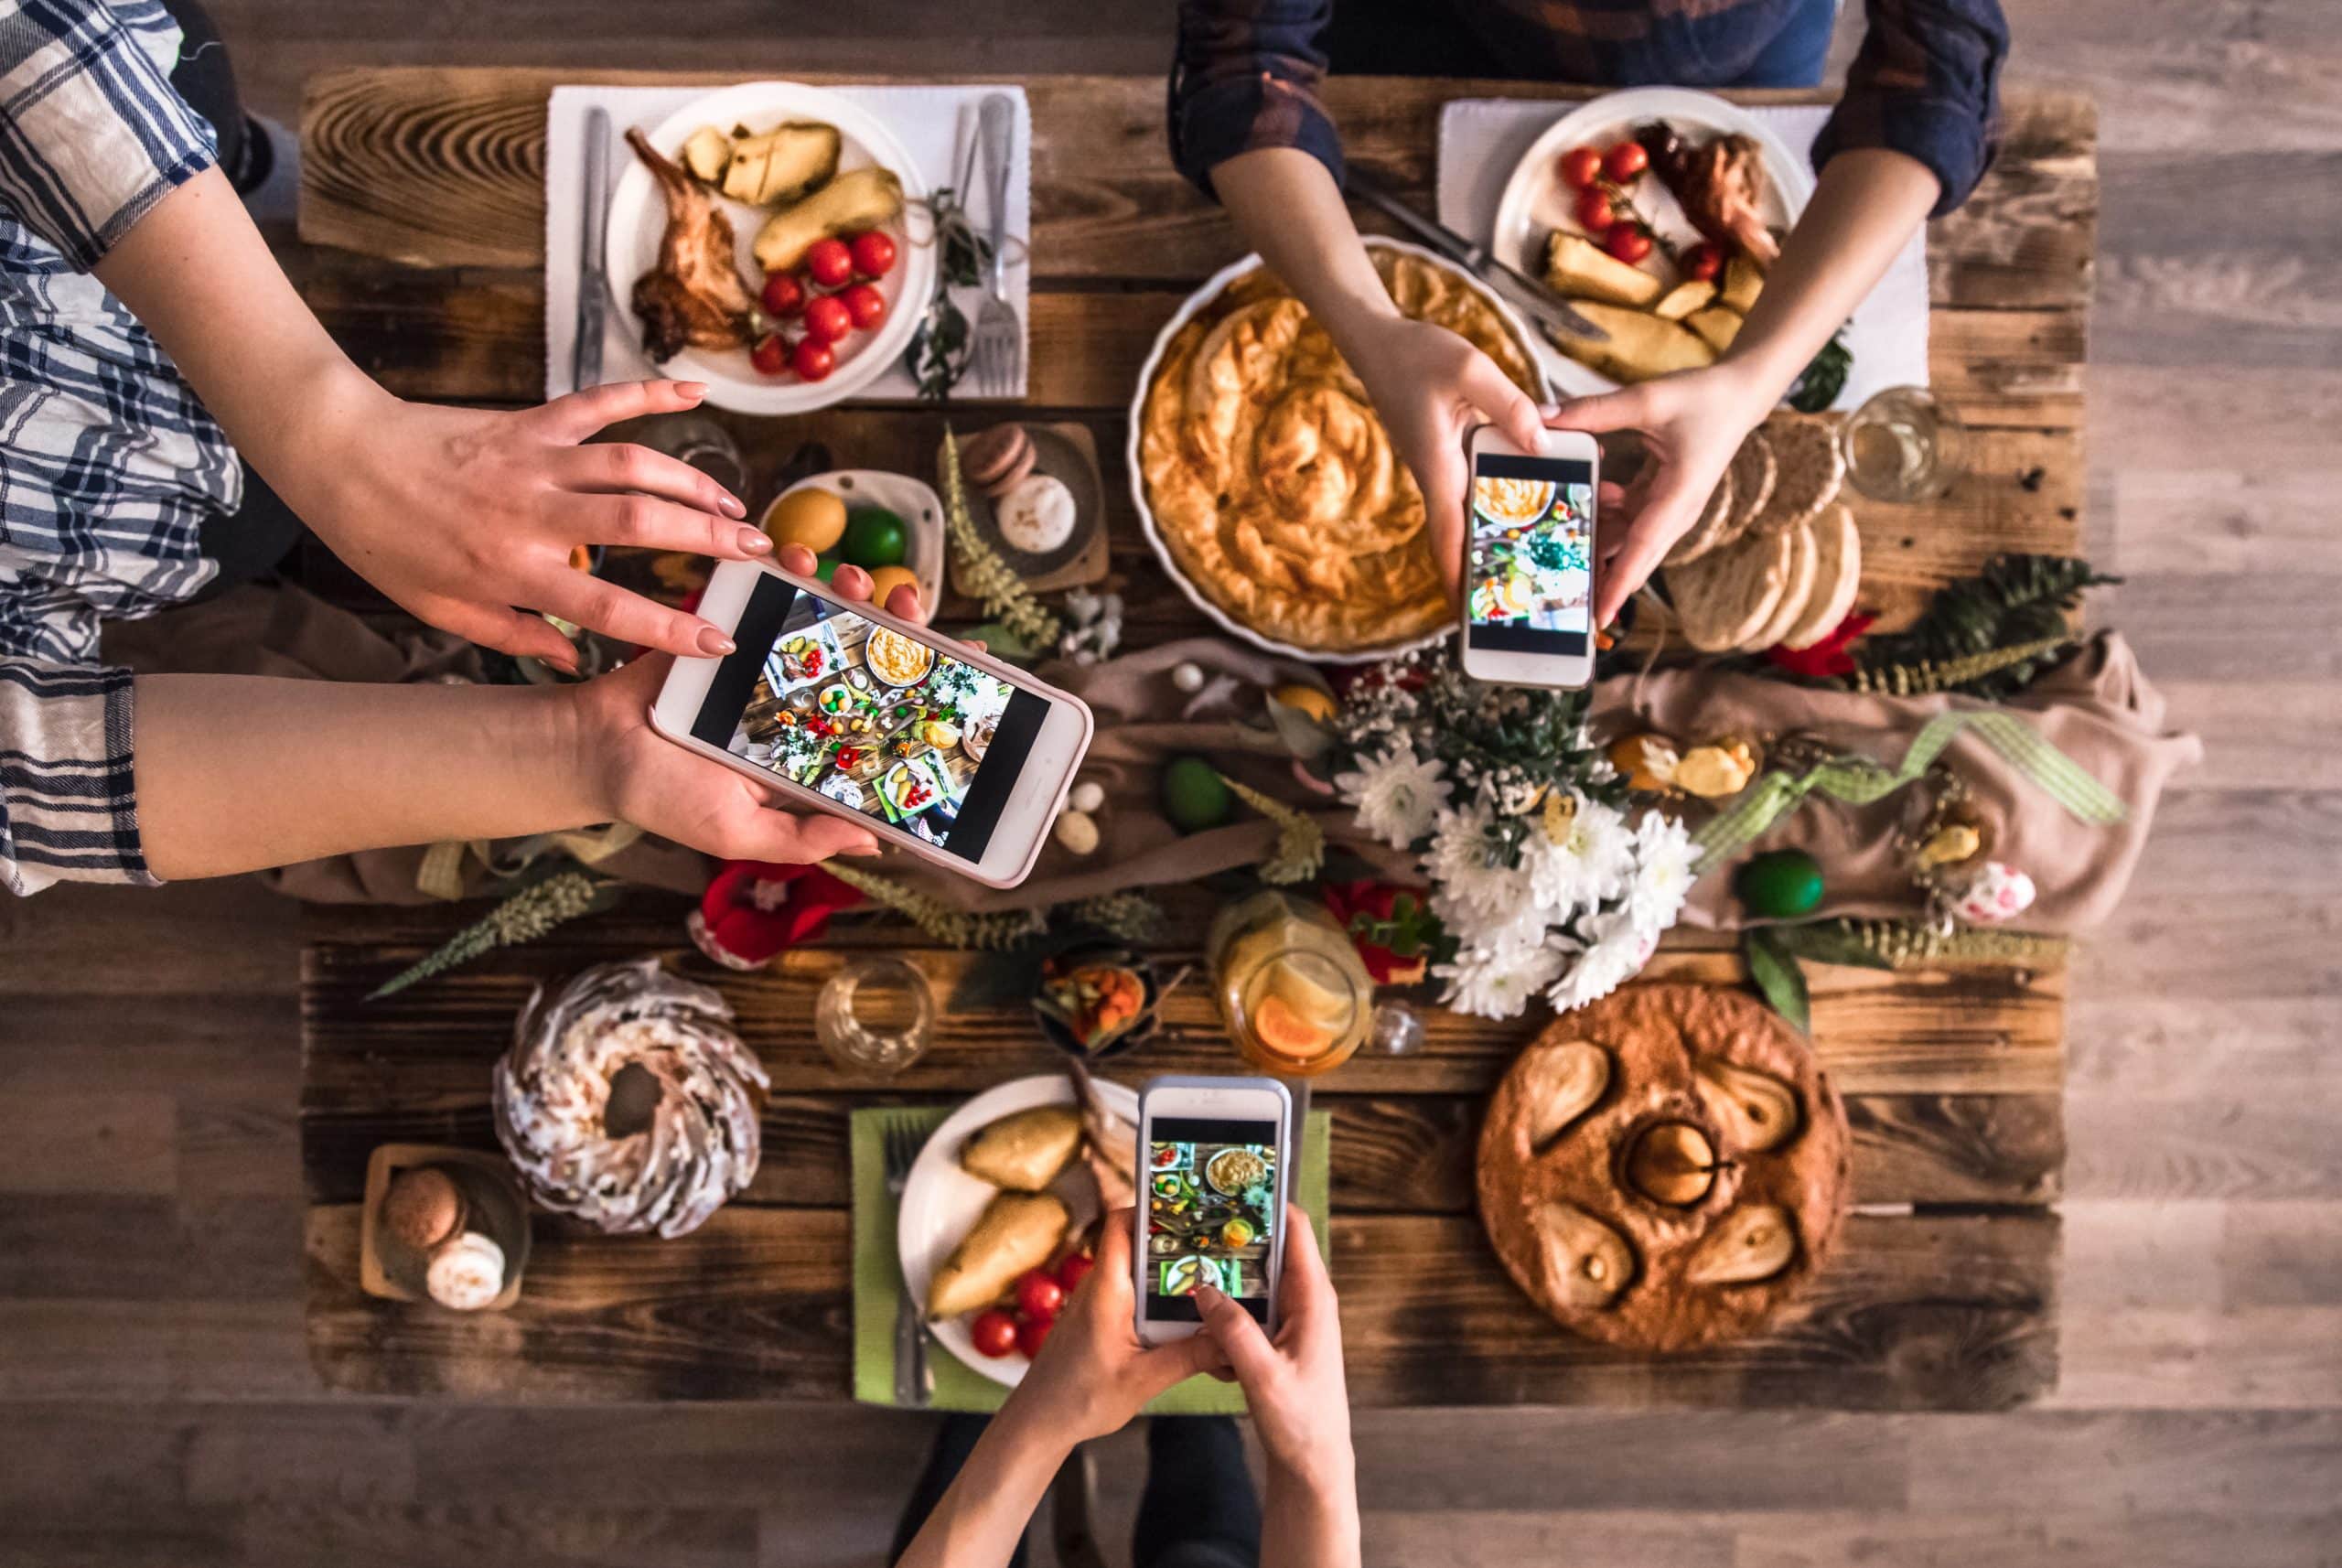 How Millennials are Disrupting the Food Industry